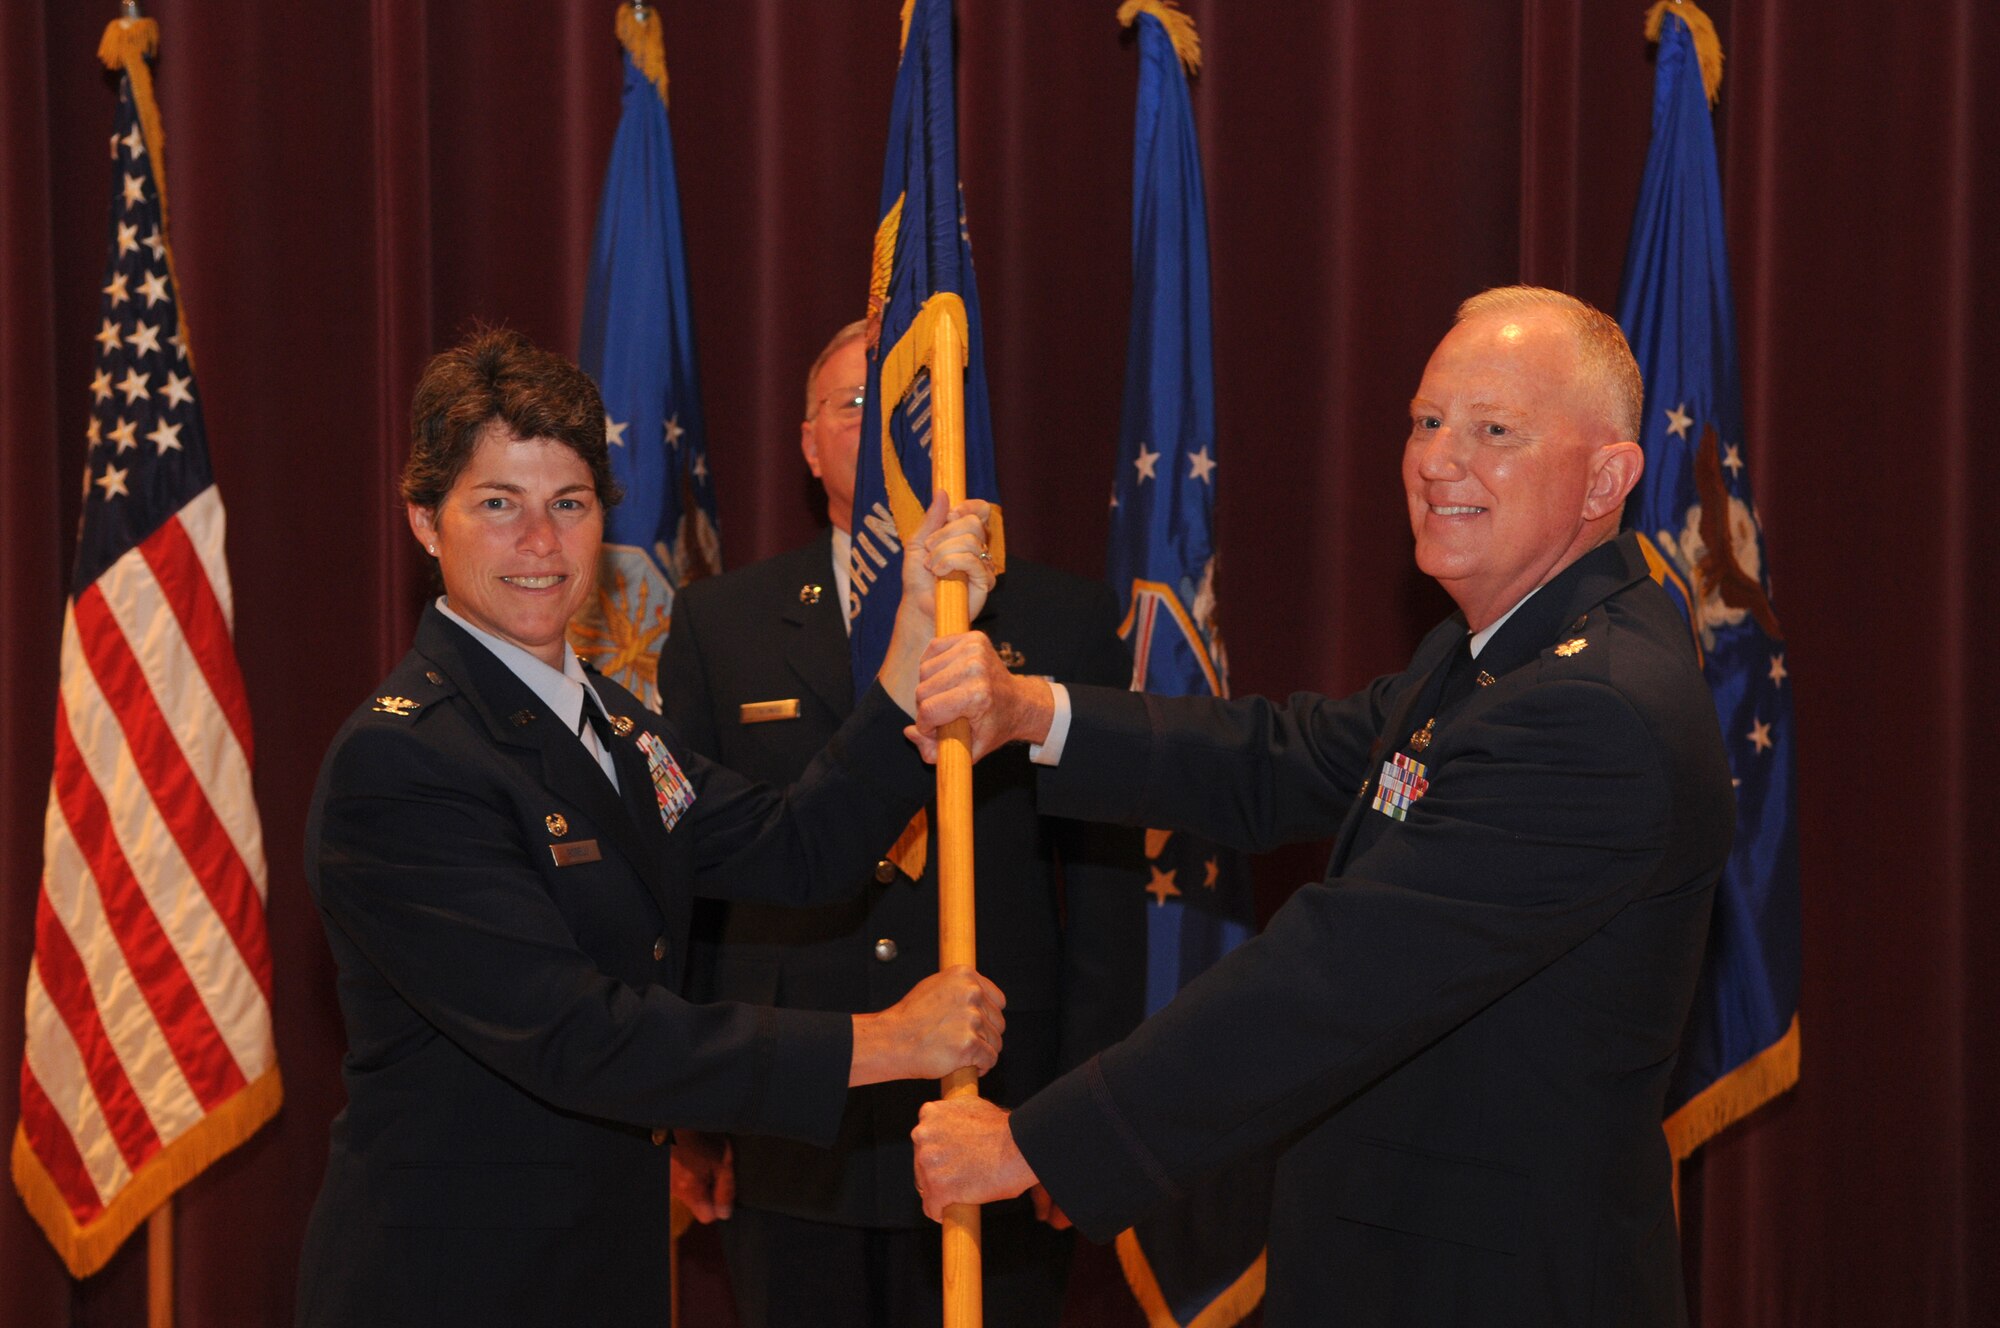 Lt. Col. Alan C. Sierichs, commander of the United States Air Force Band, accepts the United States Air Force Band guidon from Col Elizabeth Borelli, commander of the 11th Operations Group, during a change of command ceremony in Hangar 2 on Bolling Air Force Base, June 30. The ceremony marked Colonel Layendecker’s final day as commander of the U.S. Air Force Band.   (U.S. Air Force photo by Senior Airman Sean Adams)